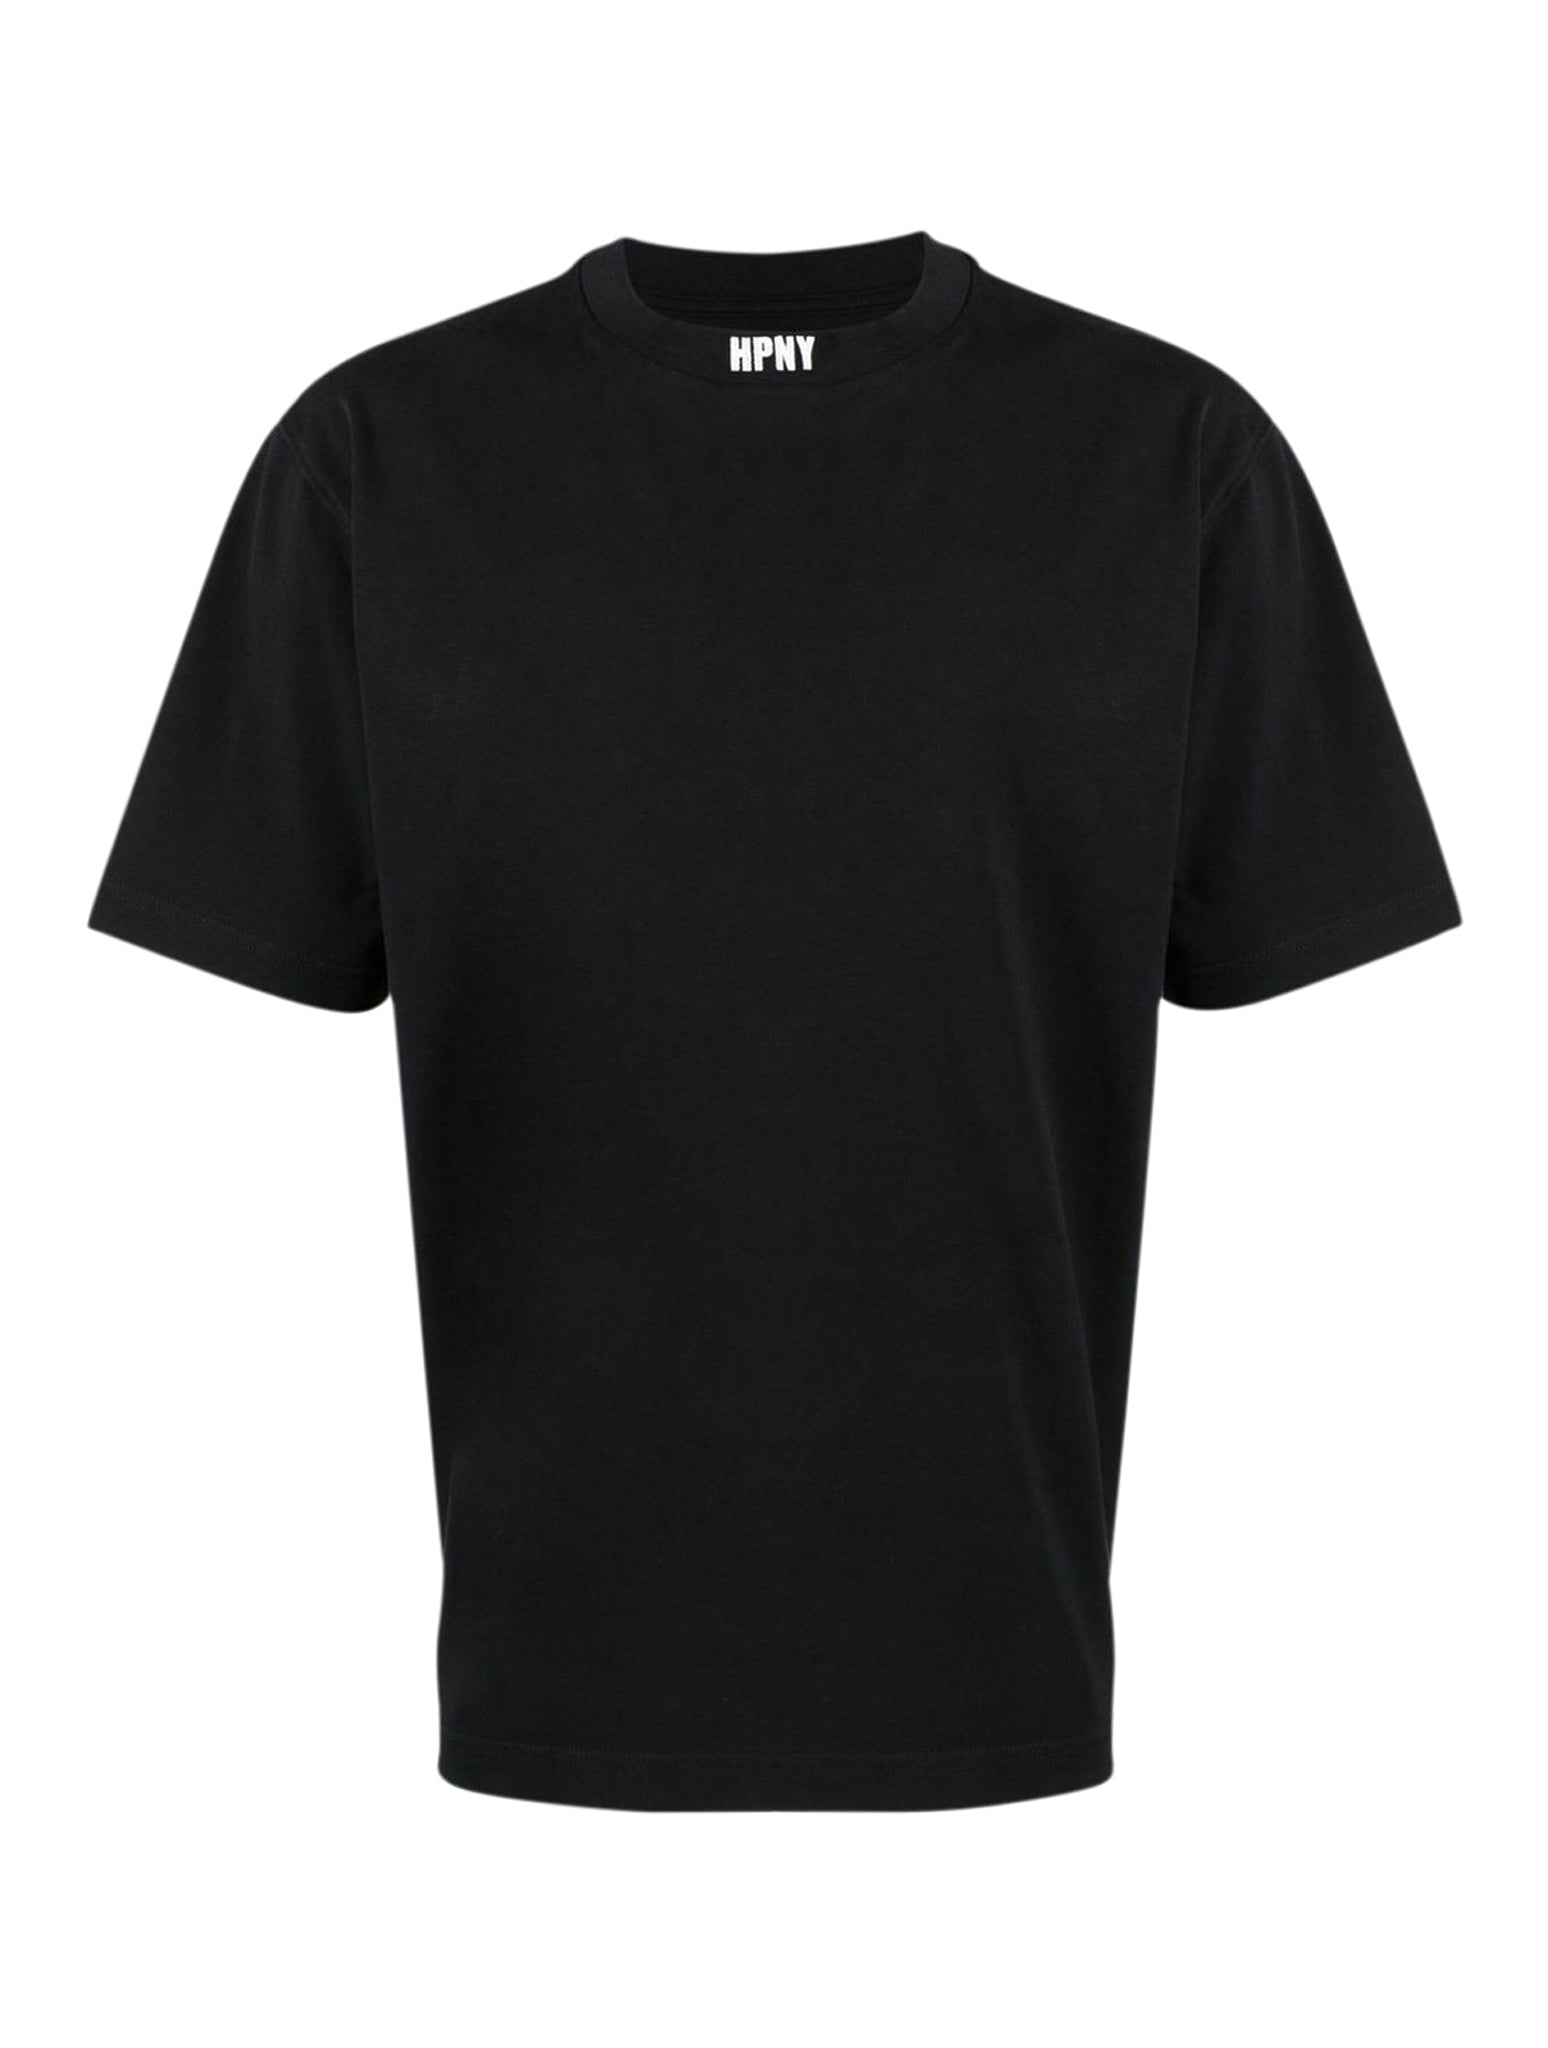 T-SHIRT IN ORGANIC COTTON WITH HPNY LOGO EMBROIDERY